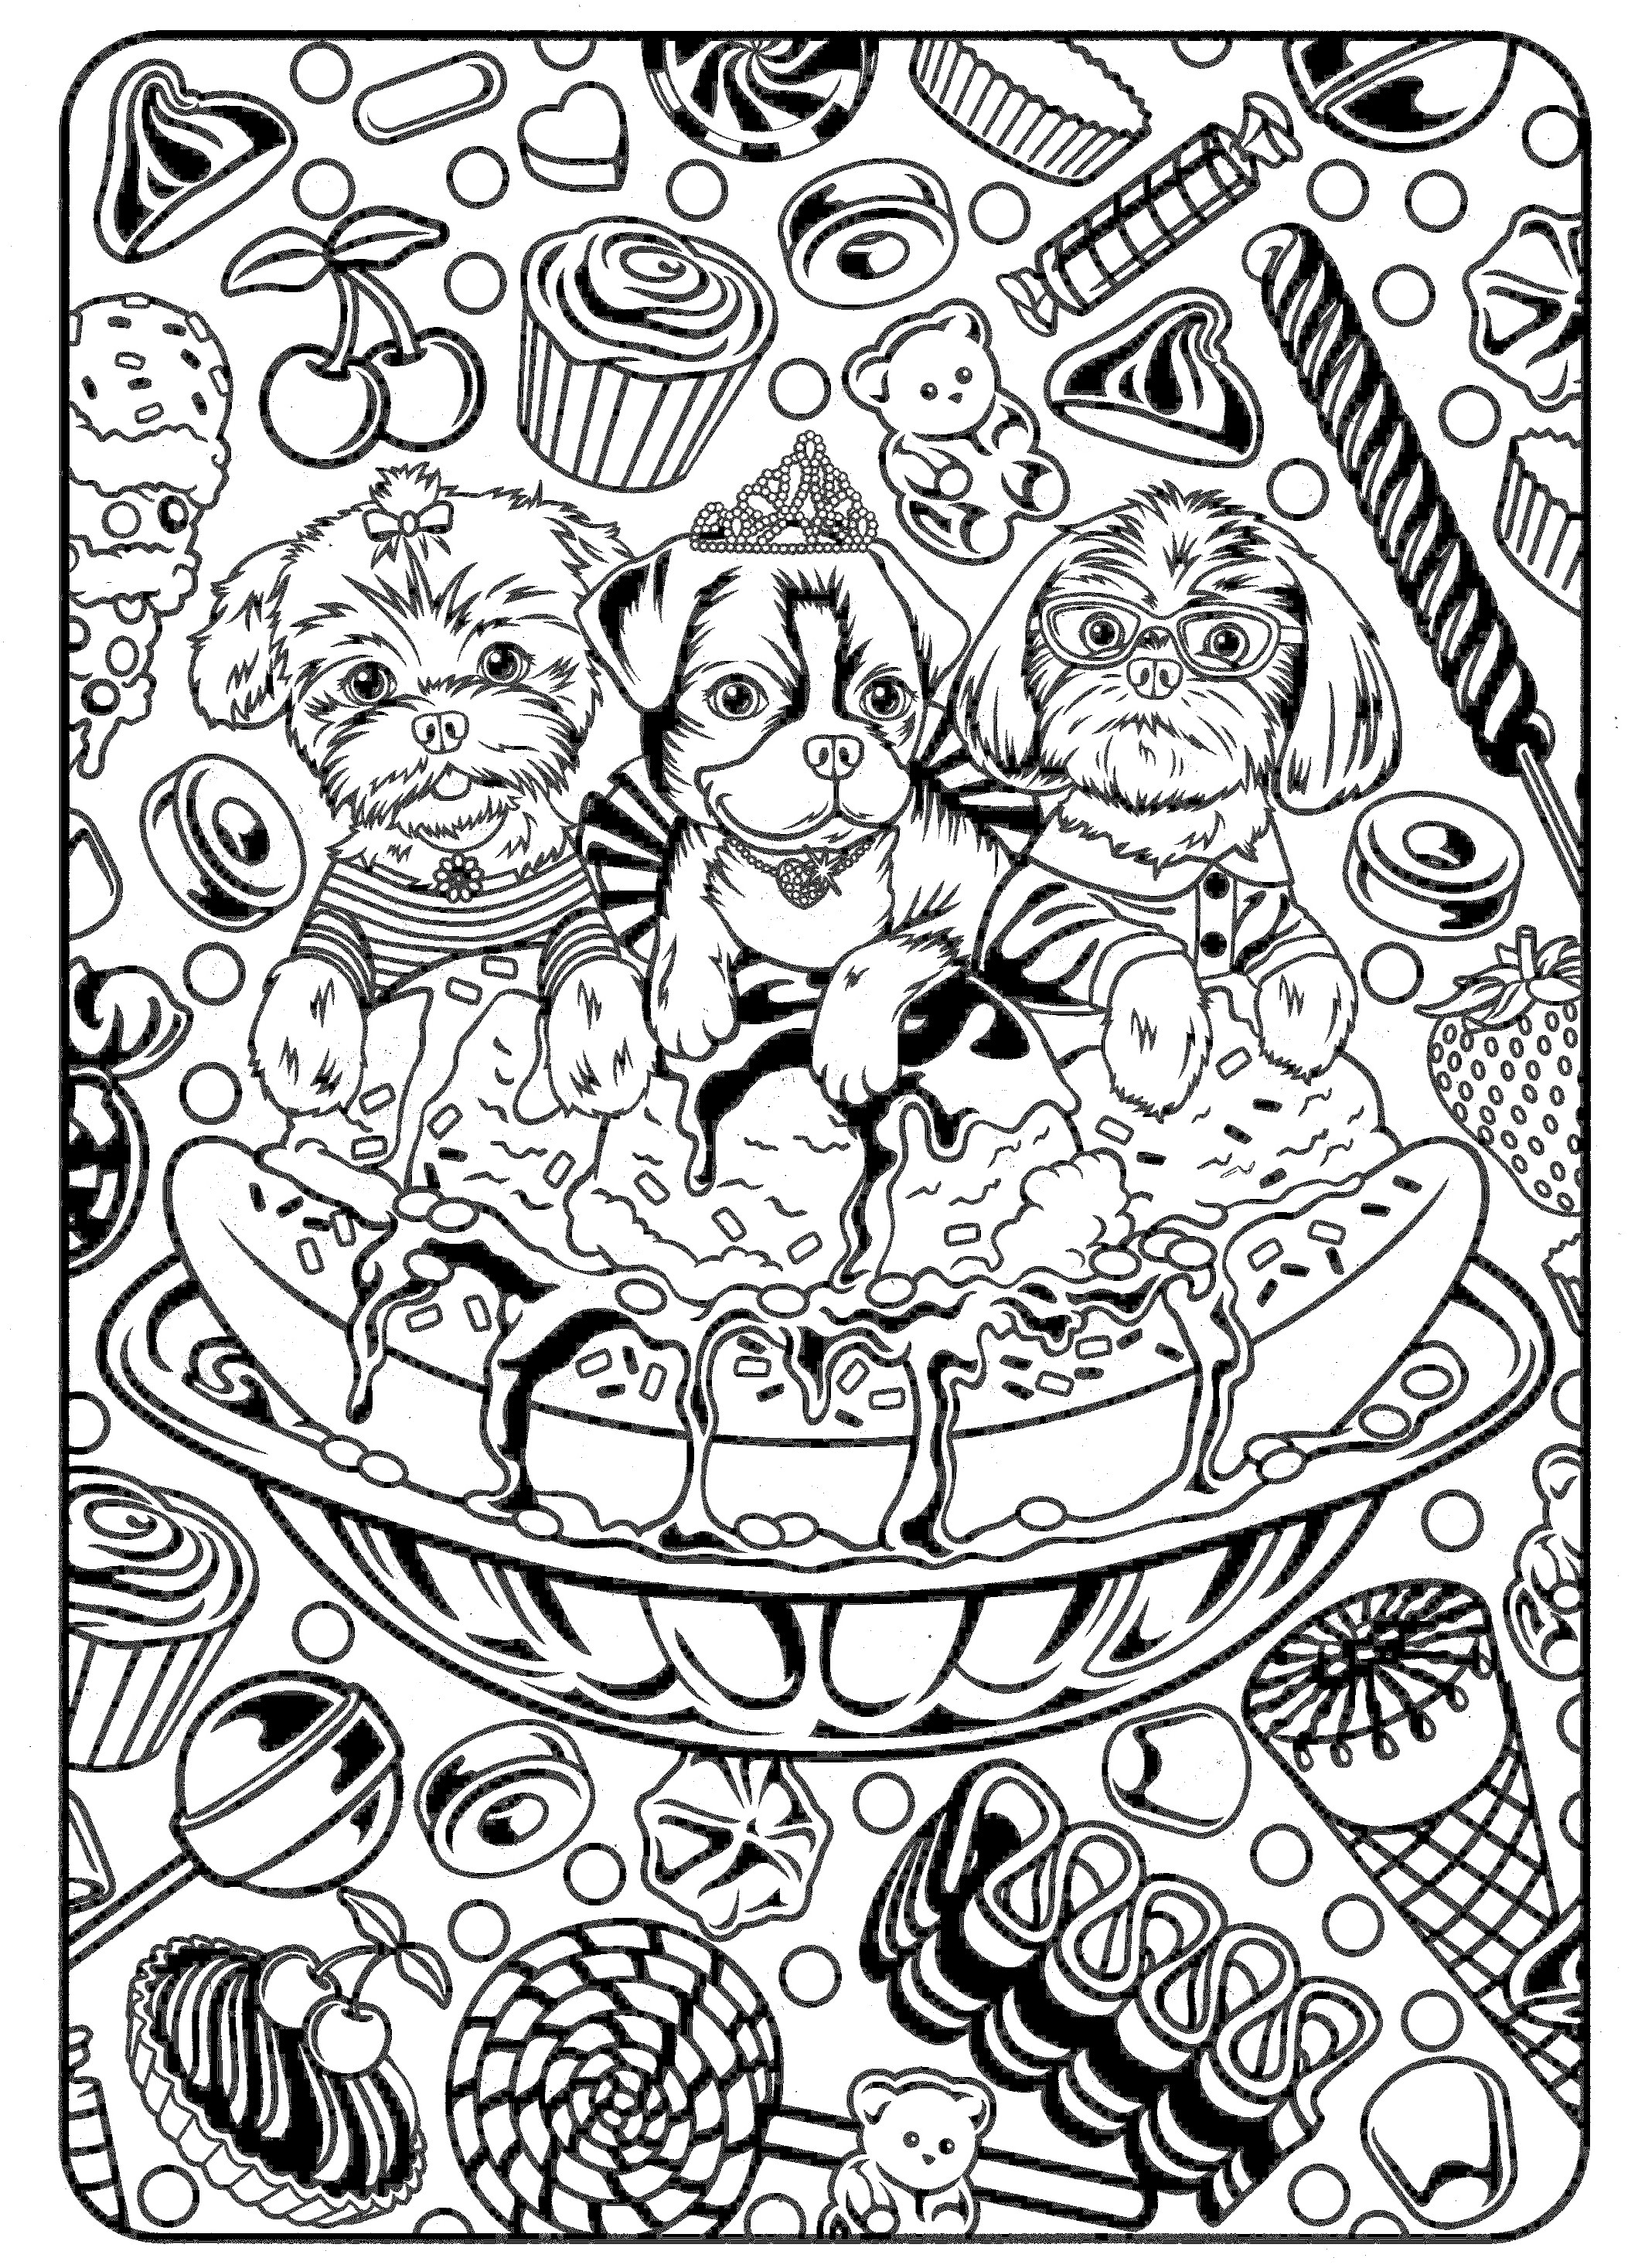 Coloring Pages For Adults Dogs at GetColorings.com | Free printable